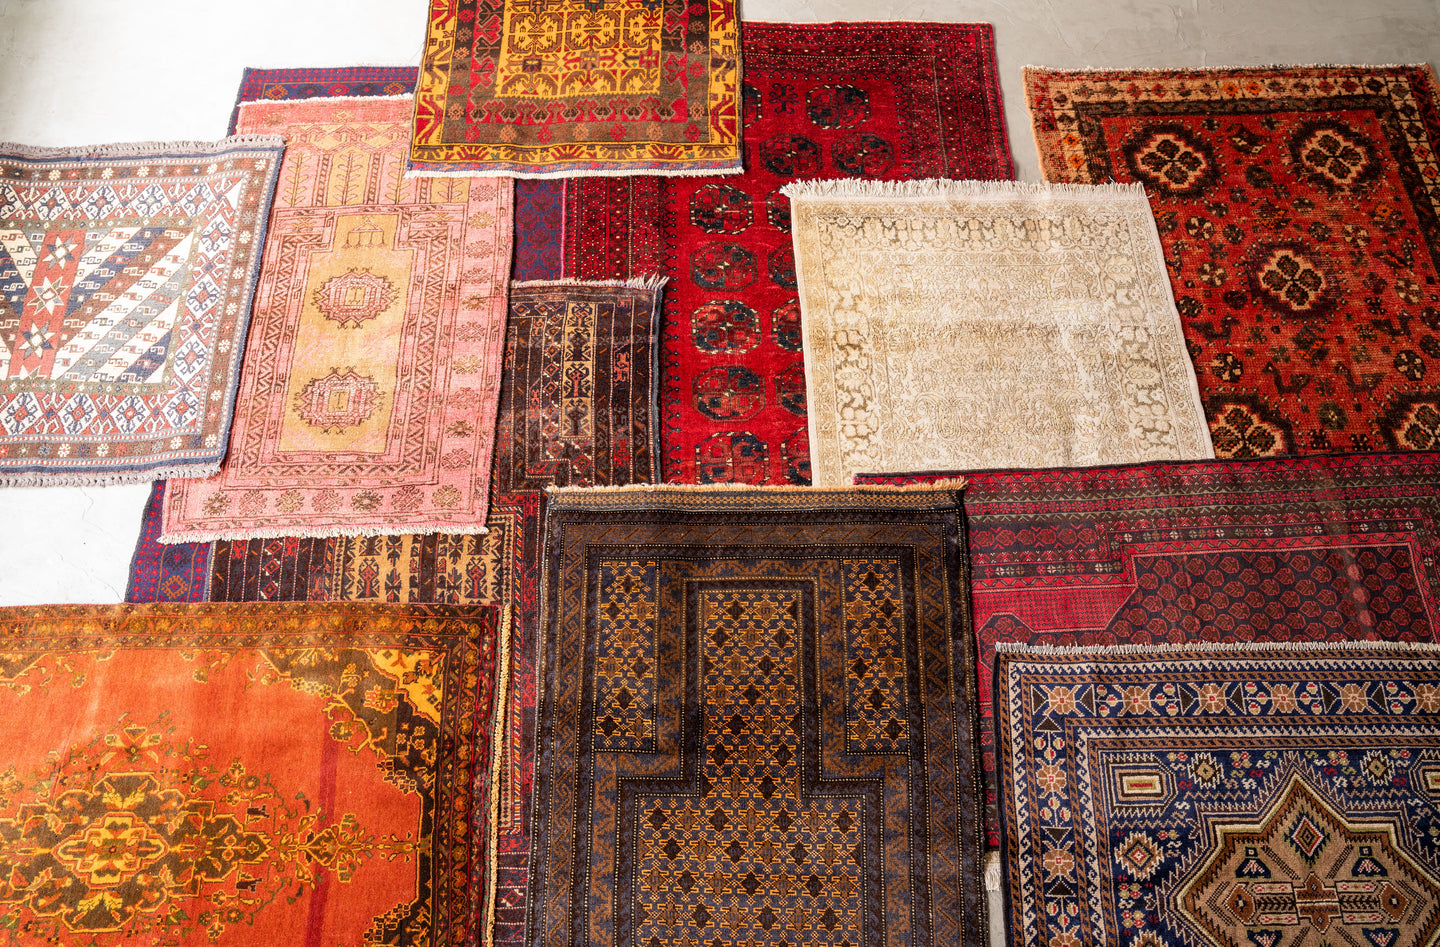 ALL RUGS